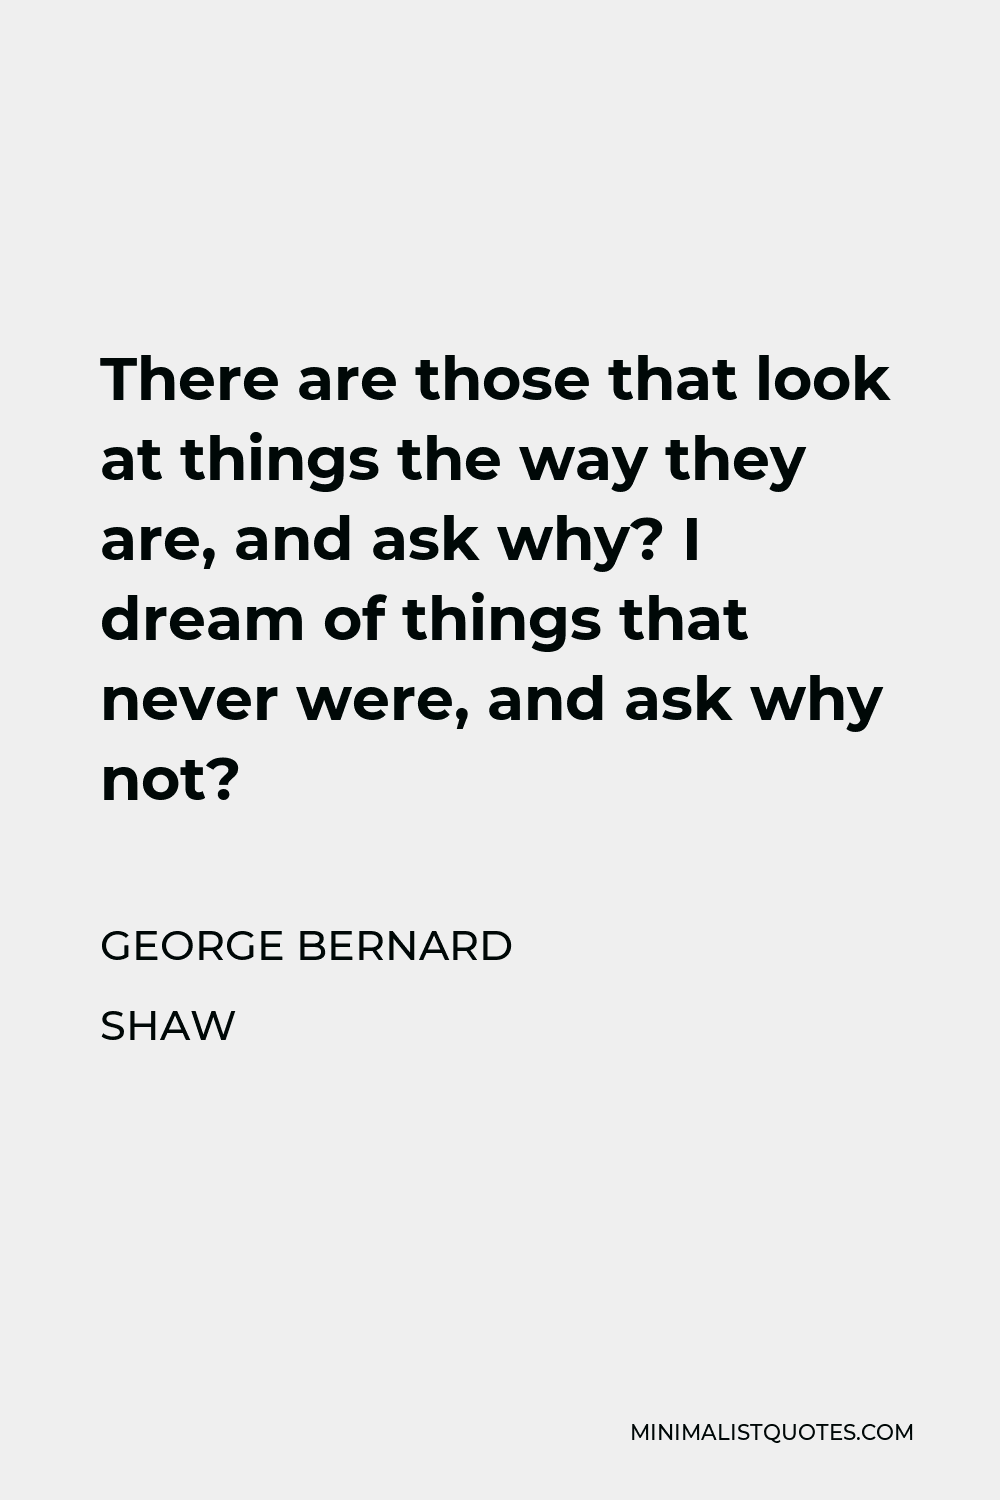 George Bernard Shaw Quote - There are those that look at things the way they are, and ask why? I dream of things that never were, and ask why not?